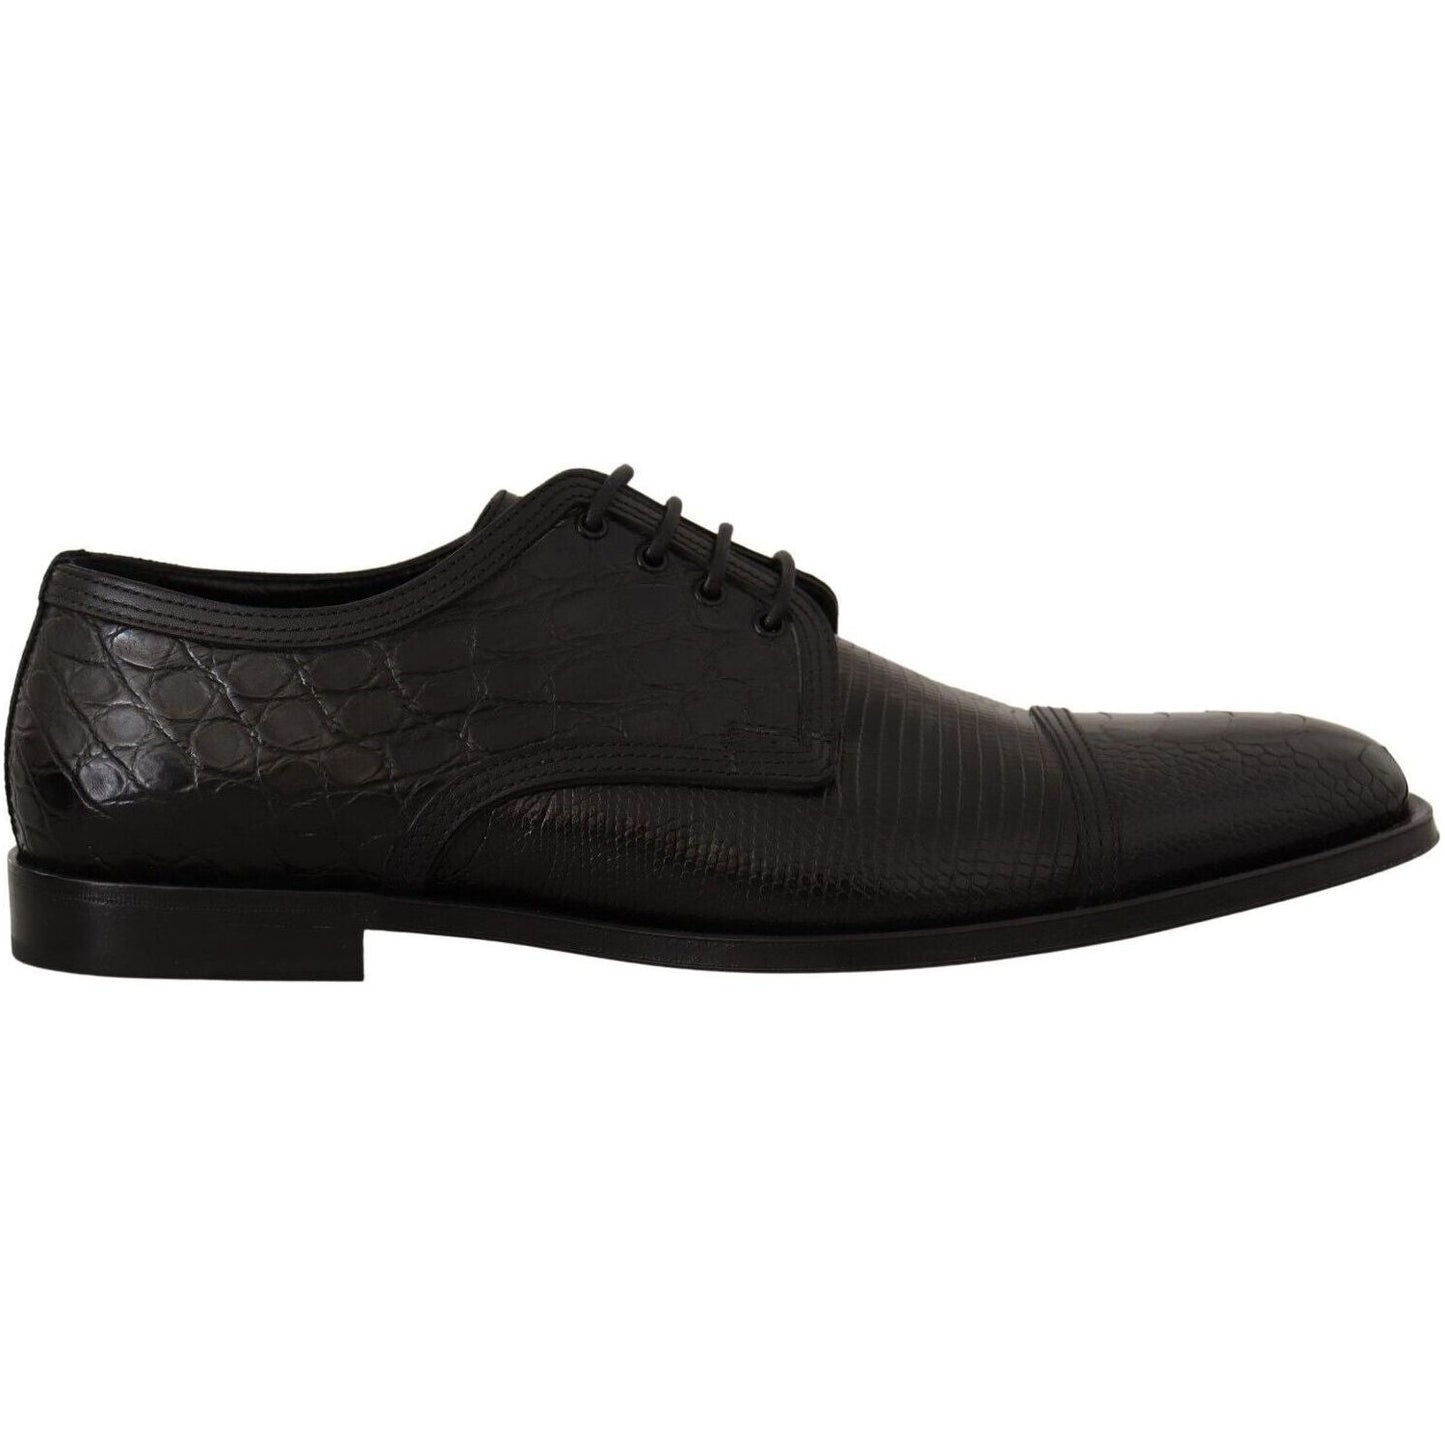 Dolce & Gabbana Exotic Leather Formal Lace-Up Shoes black-exotic-leather-lace-up-formal-derby-shoes